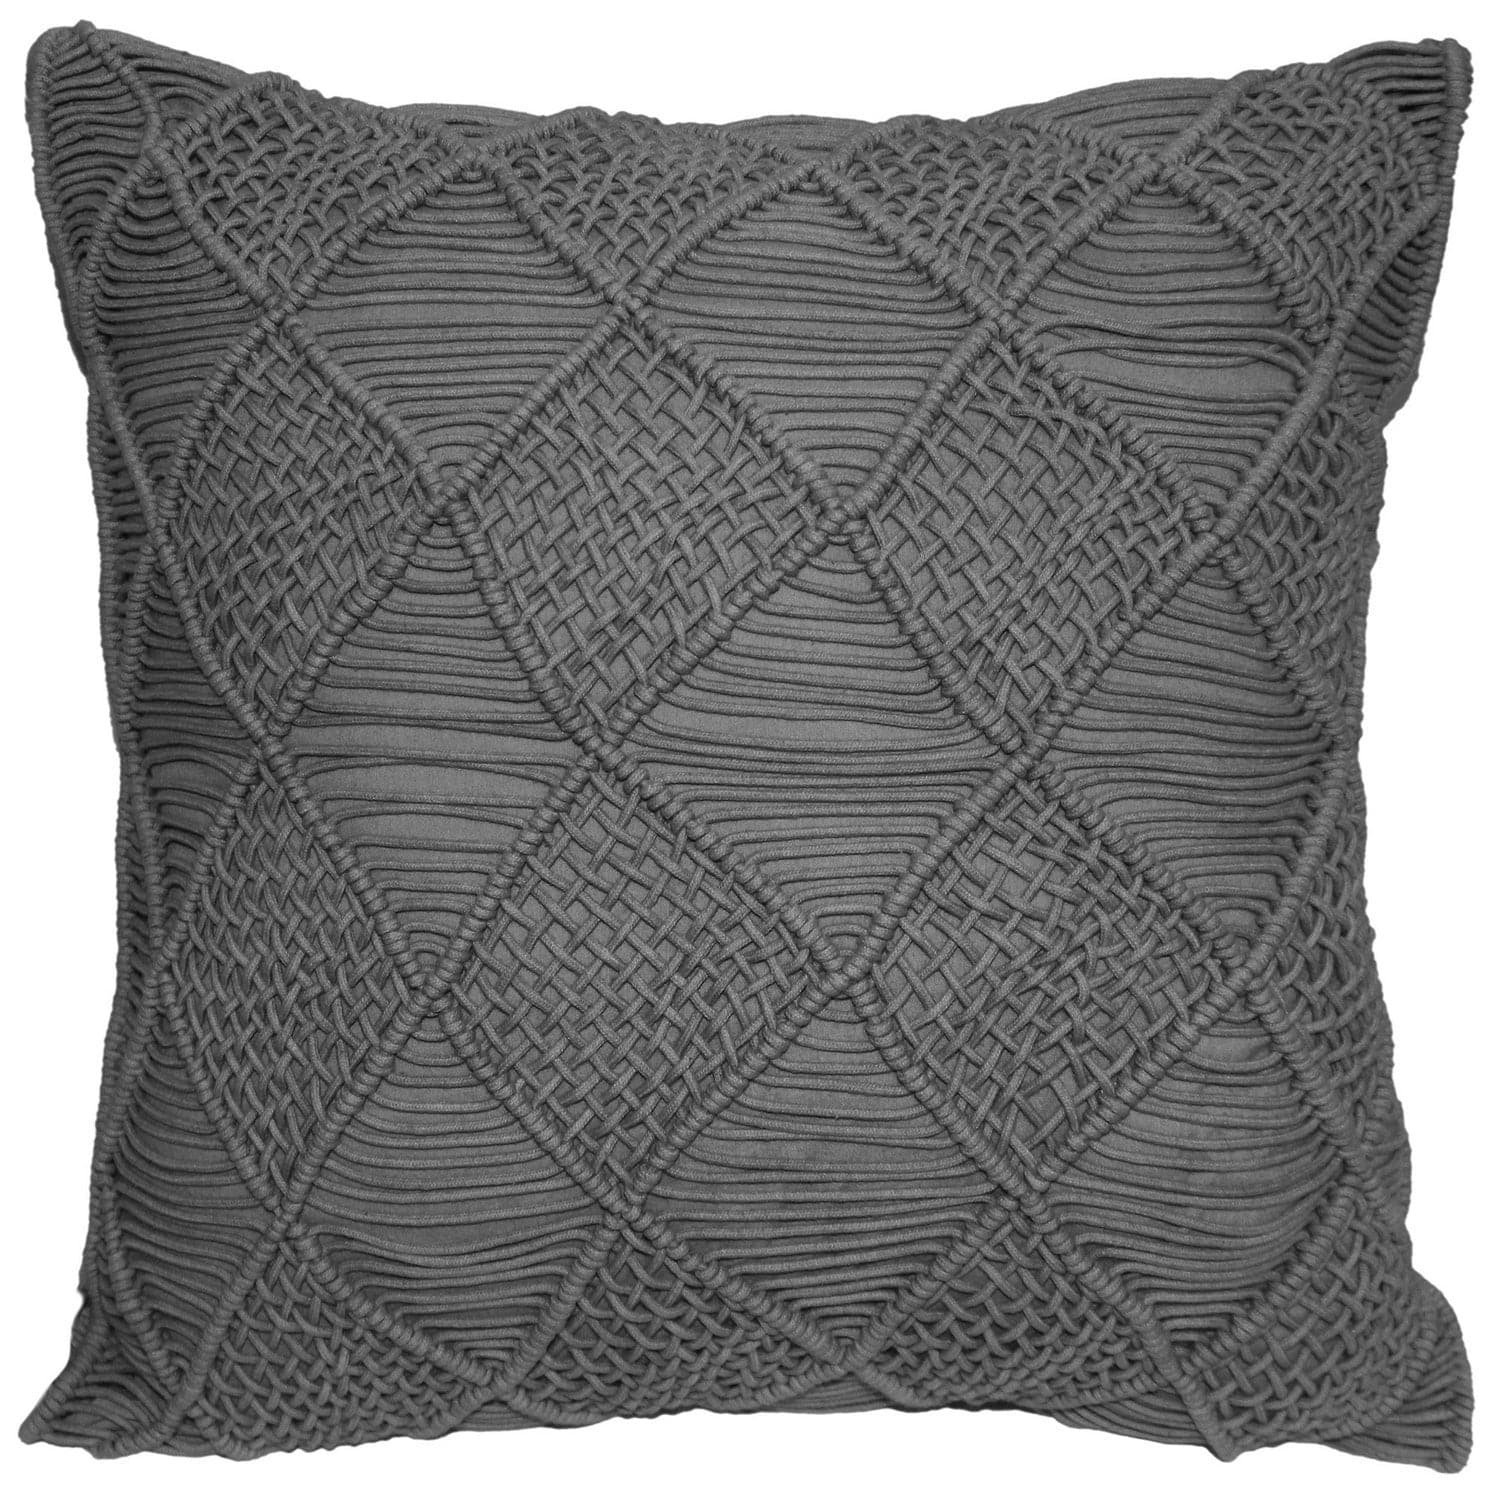 Renwil - PWFL1211 - Home Accents - Rugs/Pillows/Blankets